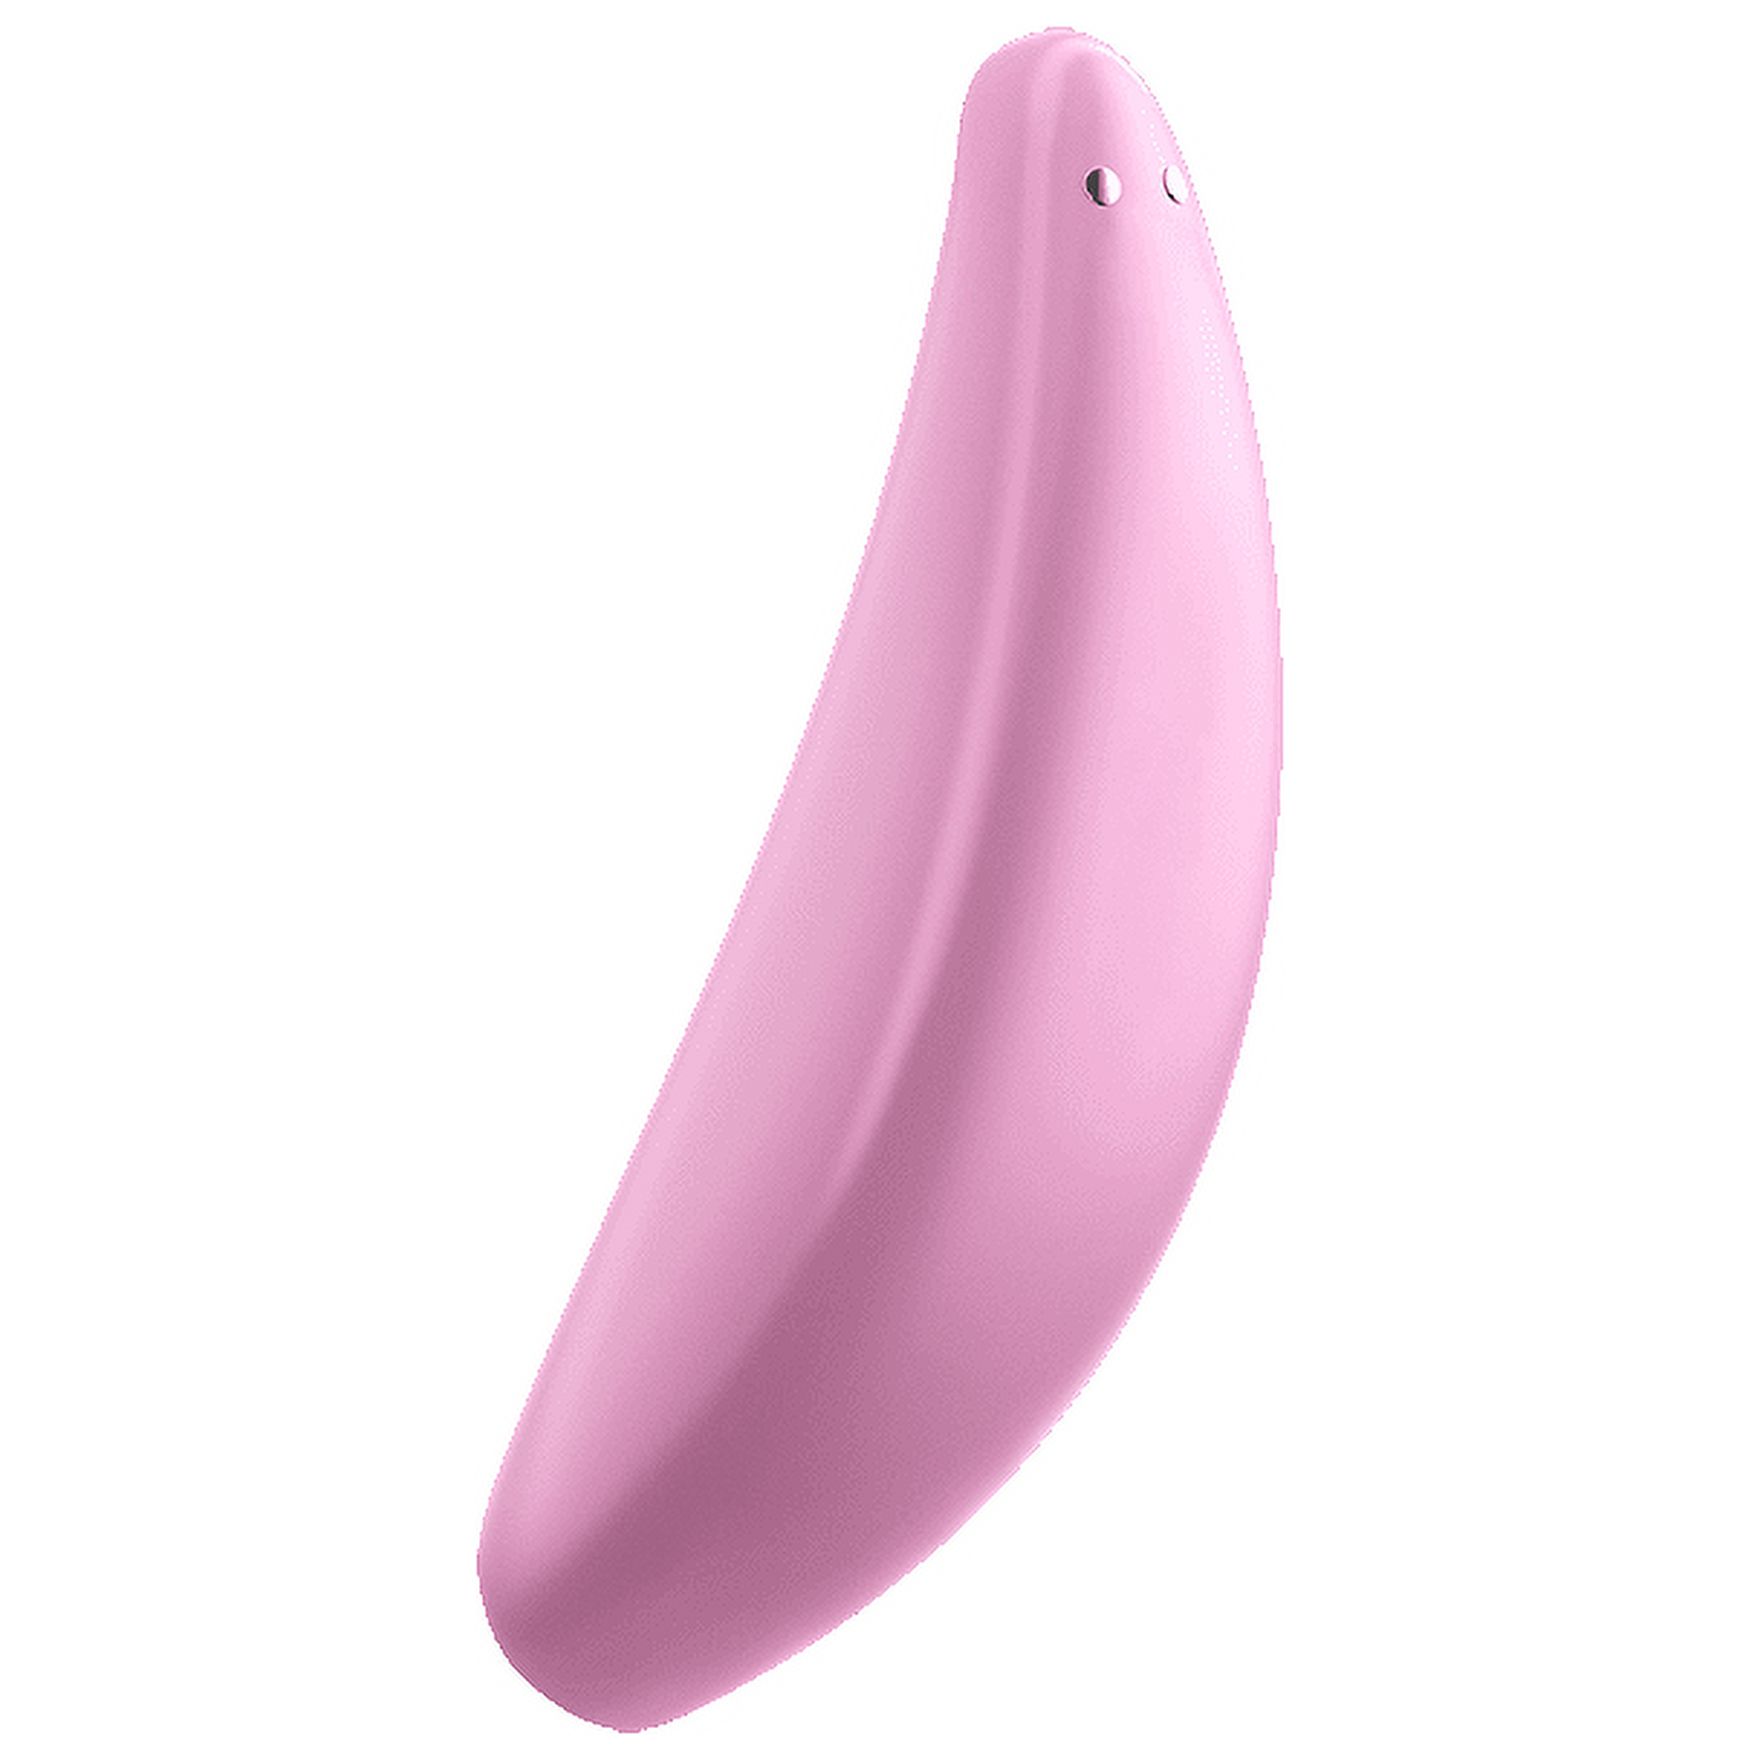 Satisfyer Curvy 3+ Air-Pulse Clitoris Stimulating Vibrator with App Control - Clitoral Sucking Pressure-Wave Technology & Vibration, Compatible with Satisfyer App, Waterproof, Rechargeable (Pink) - image 3 of 7